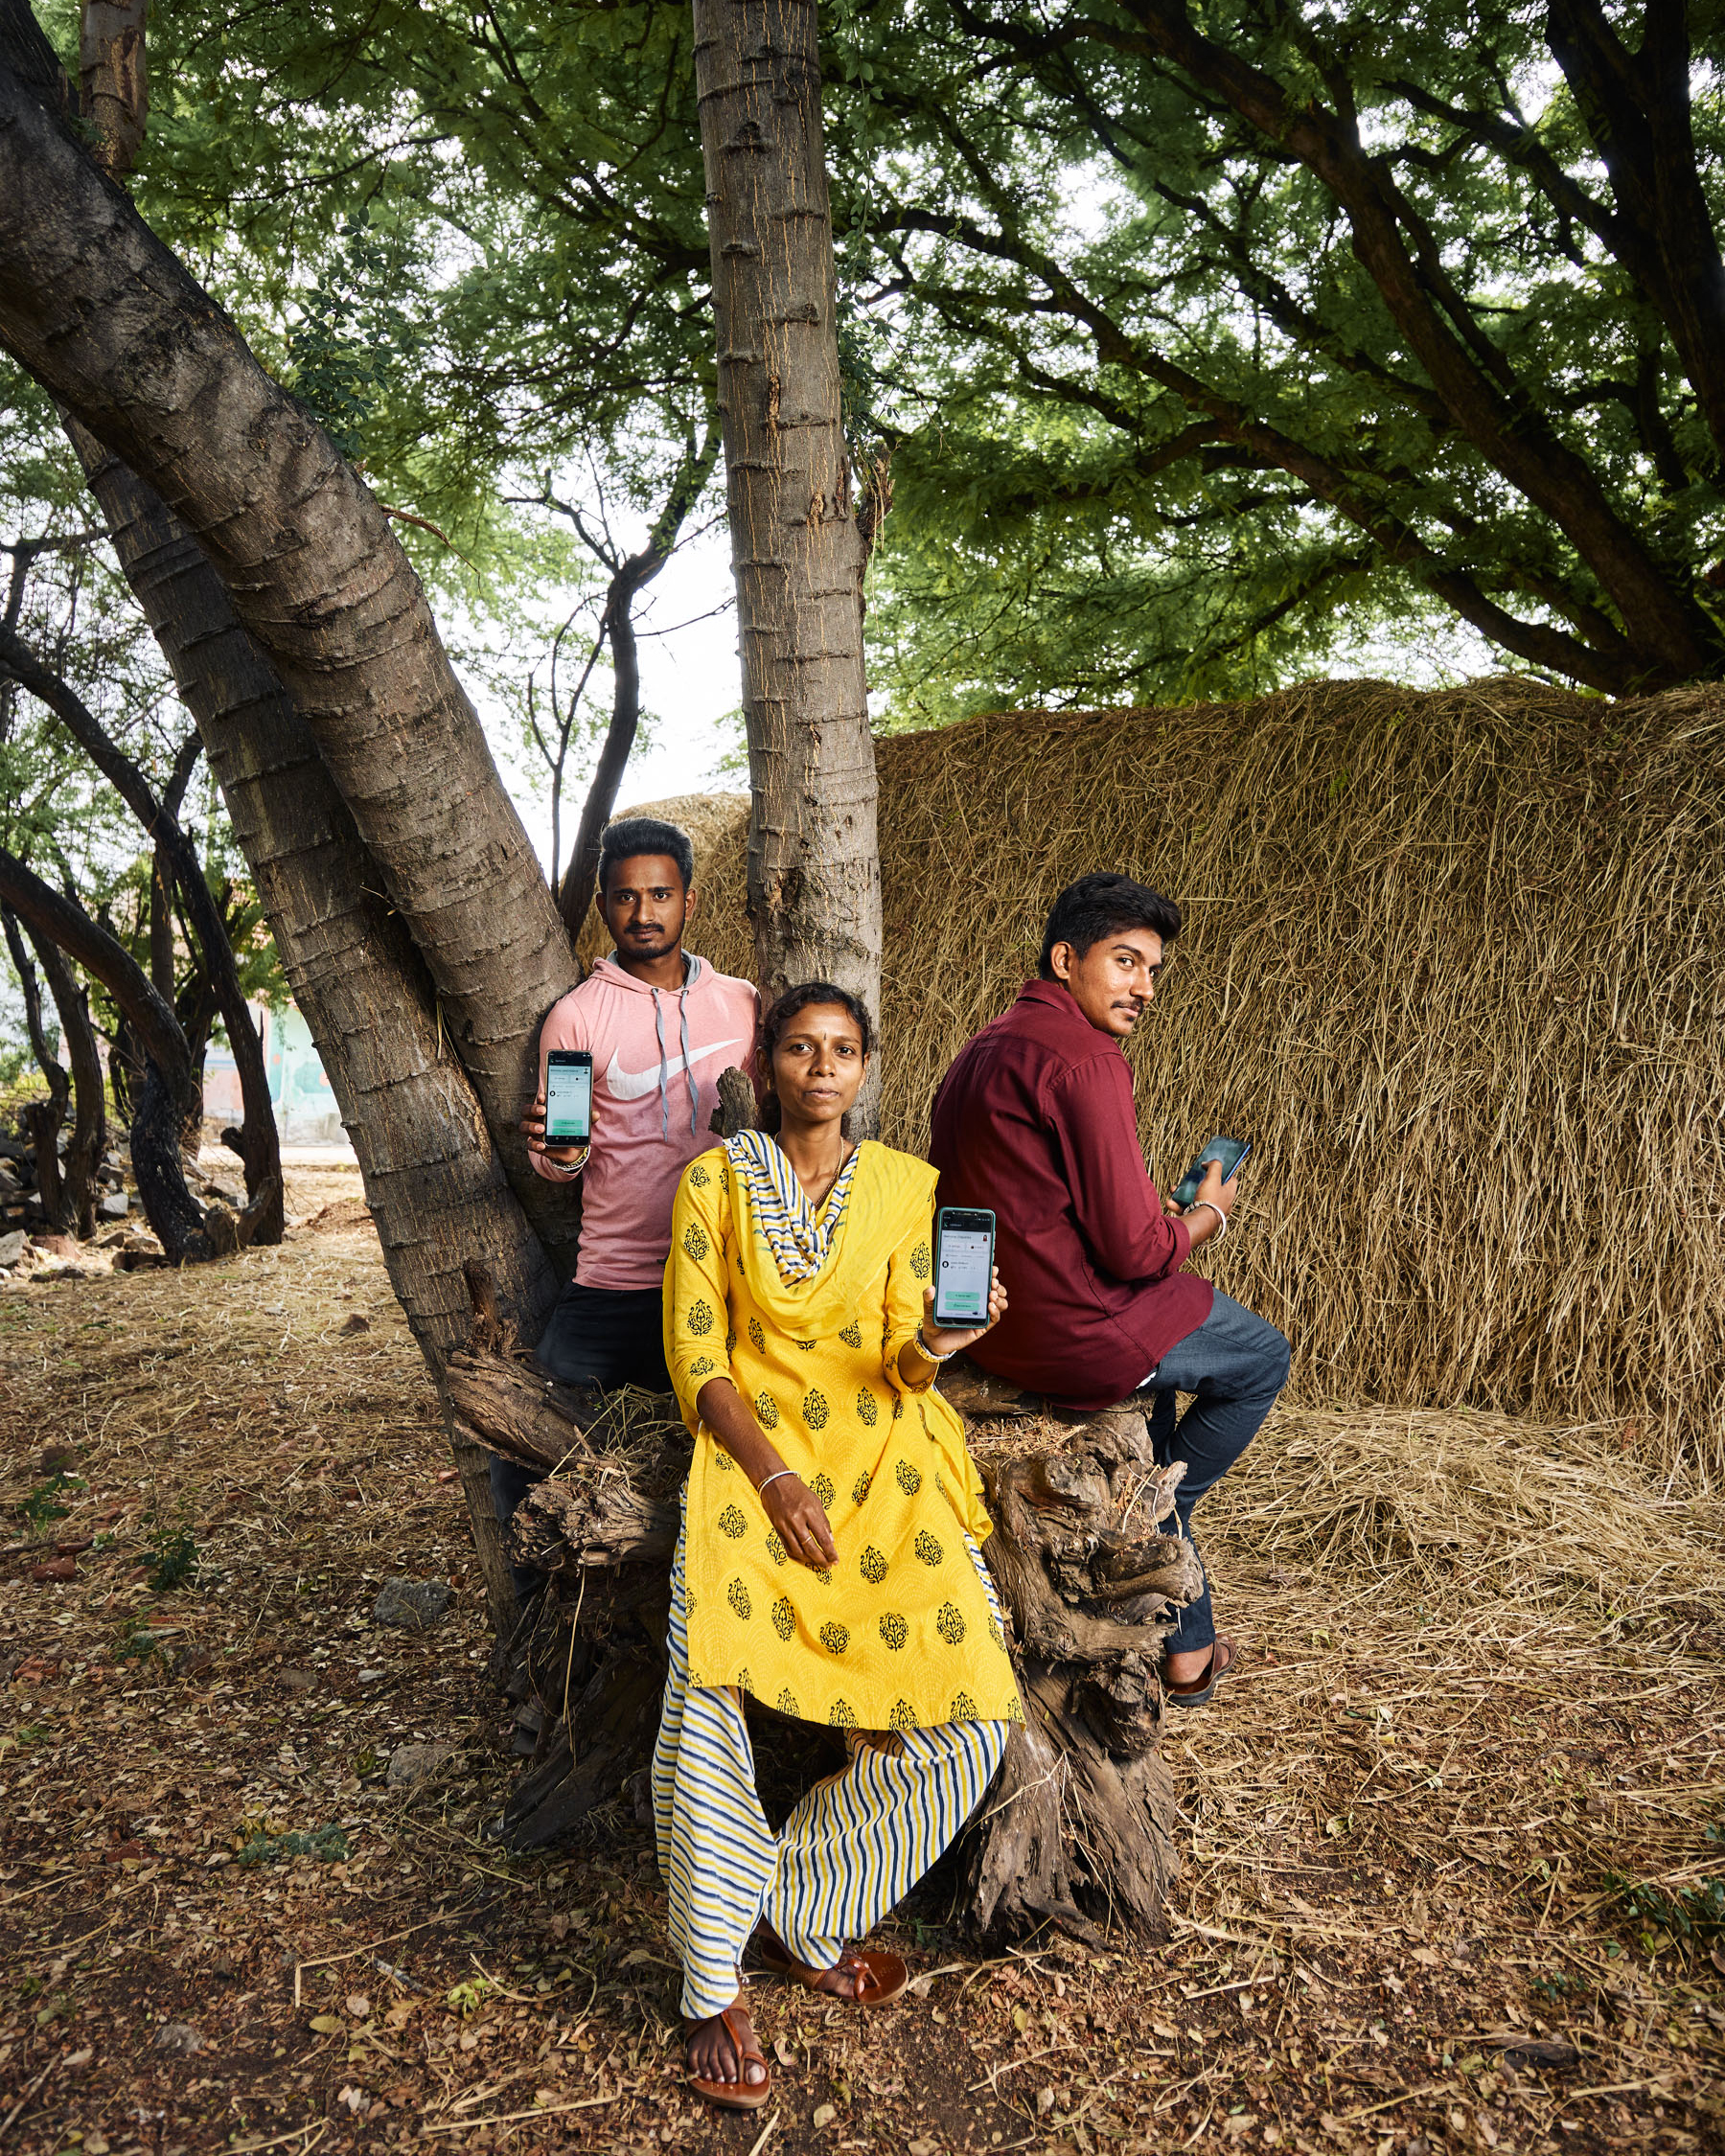 L to R: Santhosh (22), Chandrika (30) and Guruprasad (23) at a clearing spacewith haystacks in the background.